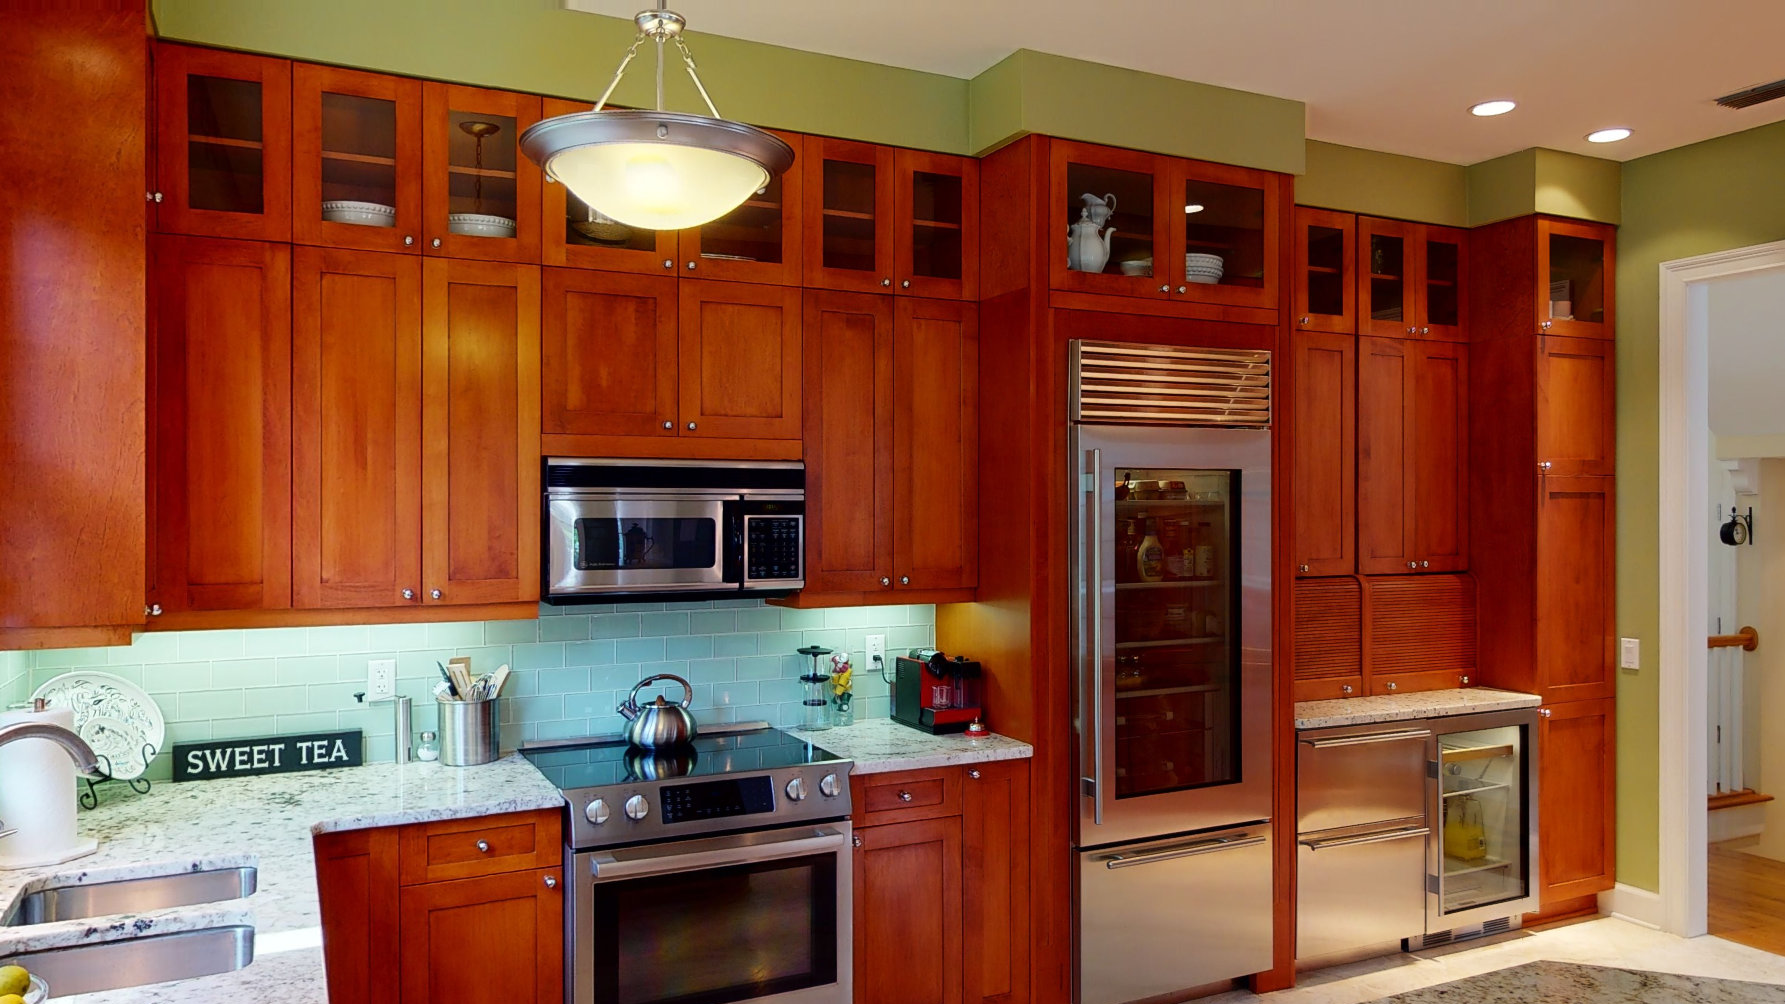 A kitchen with wooden cabinets and metallic appliances